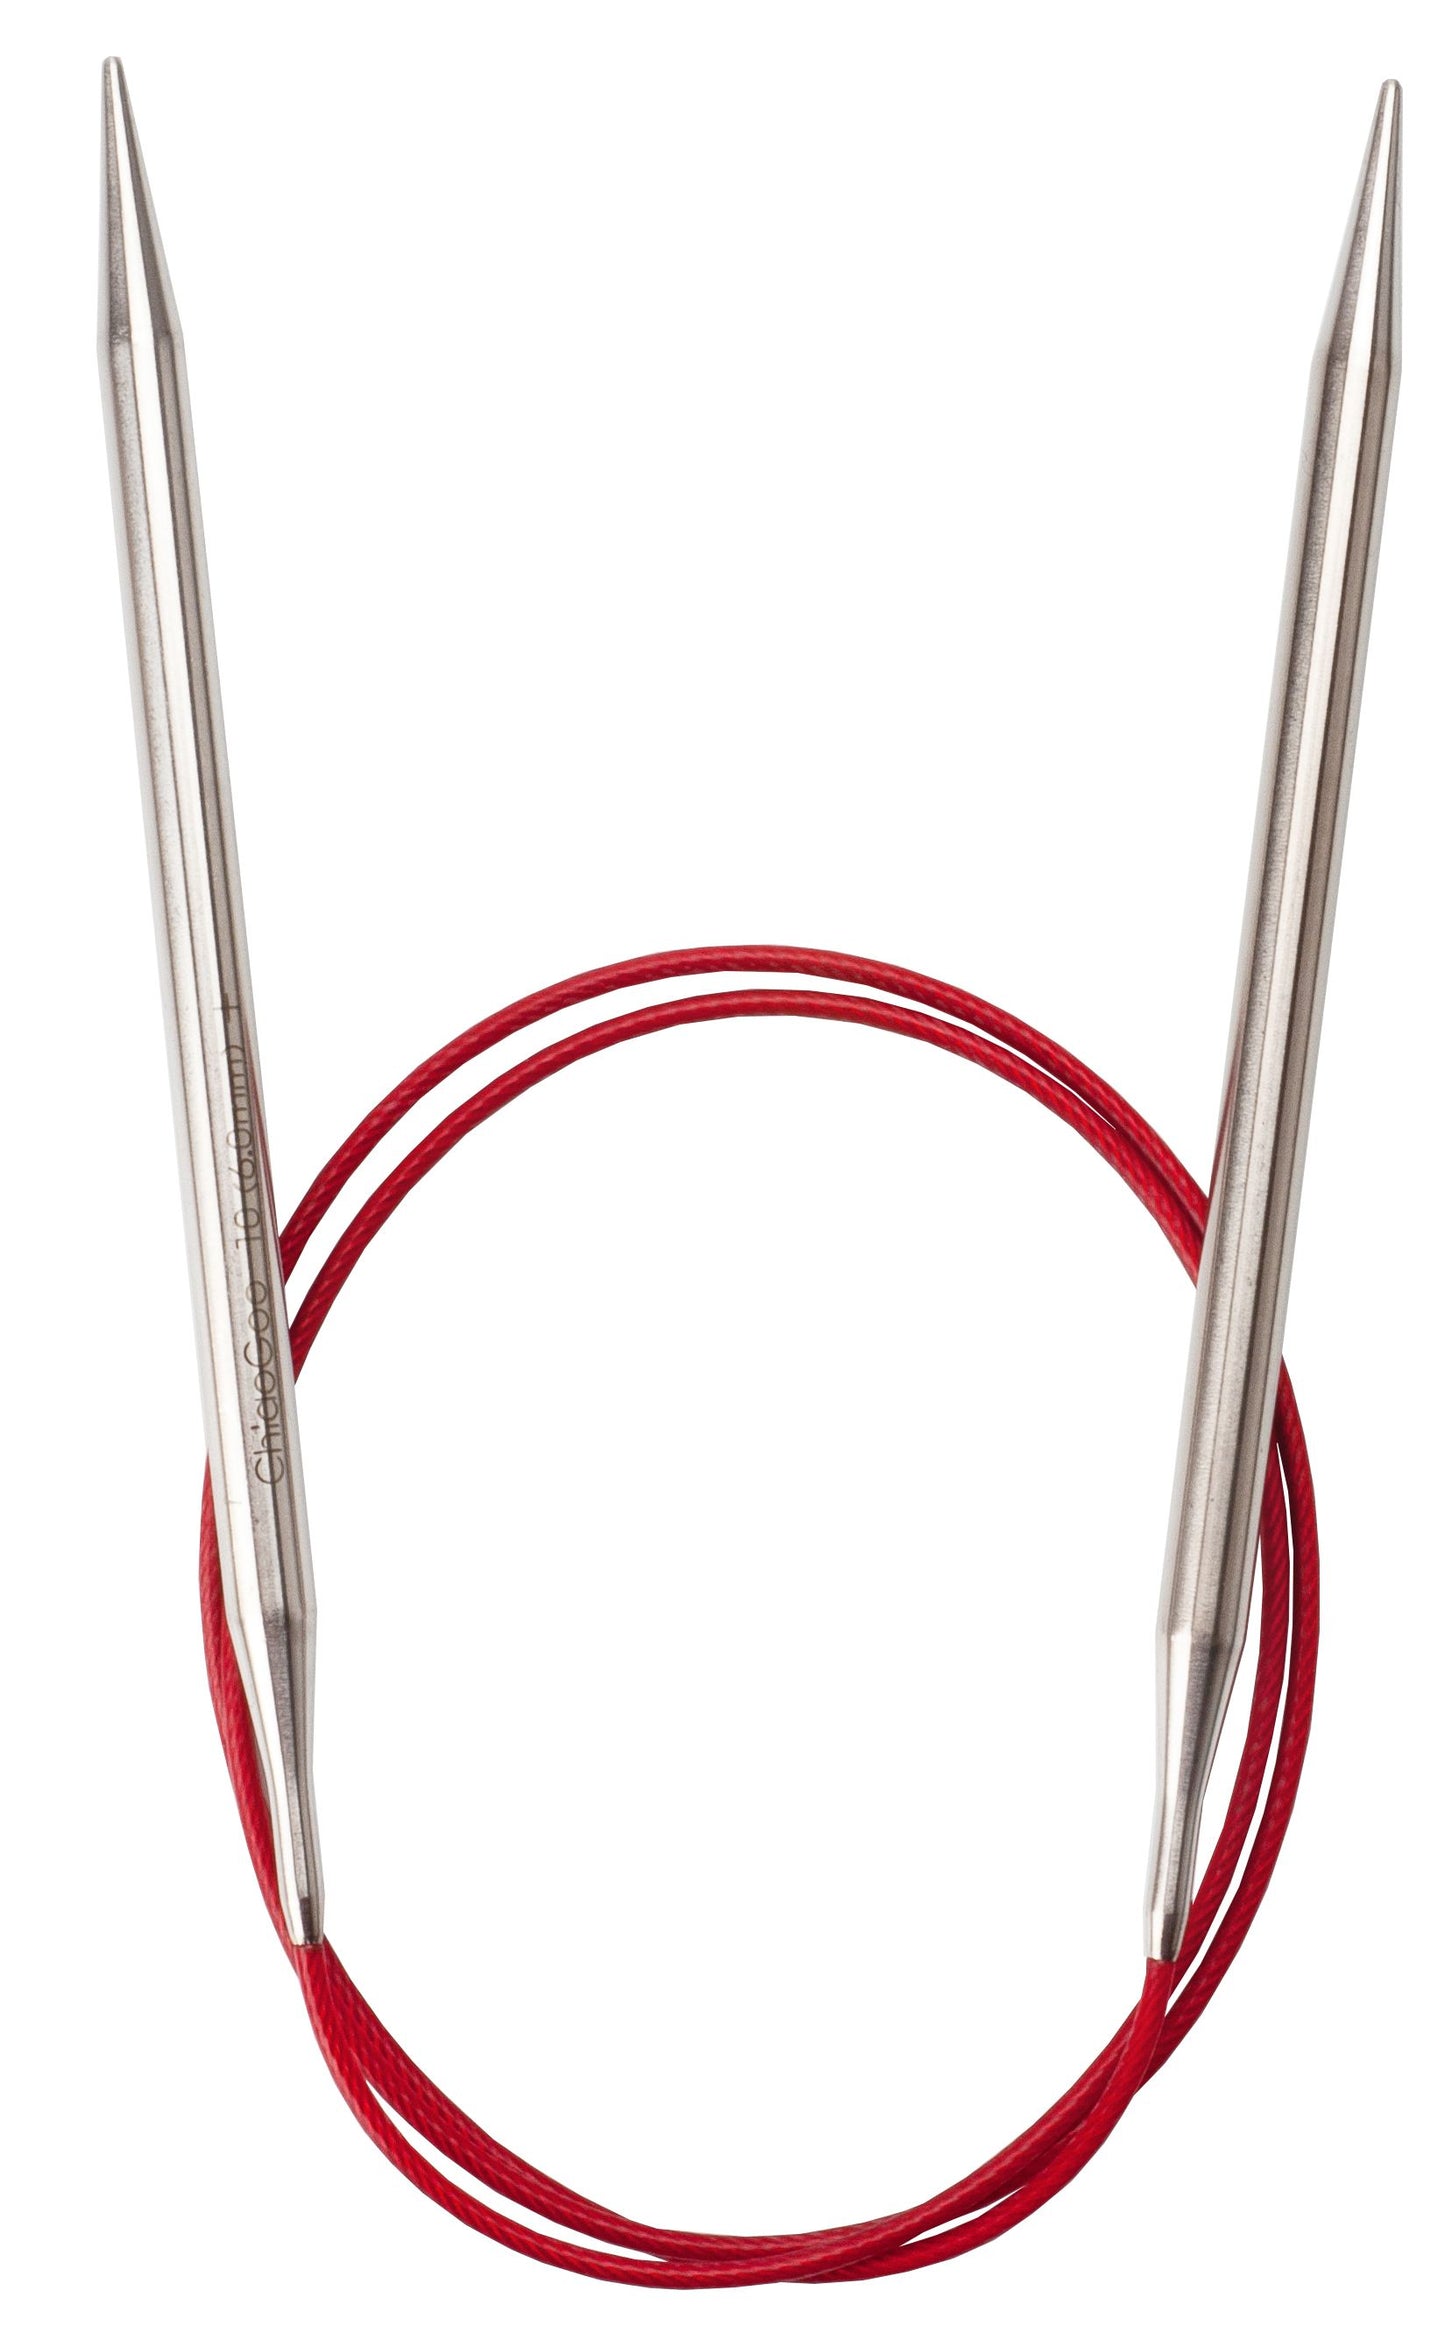 ChiaoGoo Red Lace Stainless Circular Knitting Needles 16, Size 7/4.5mm